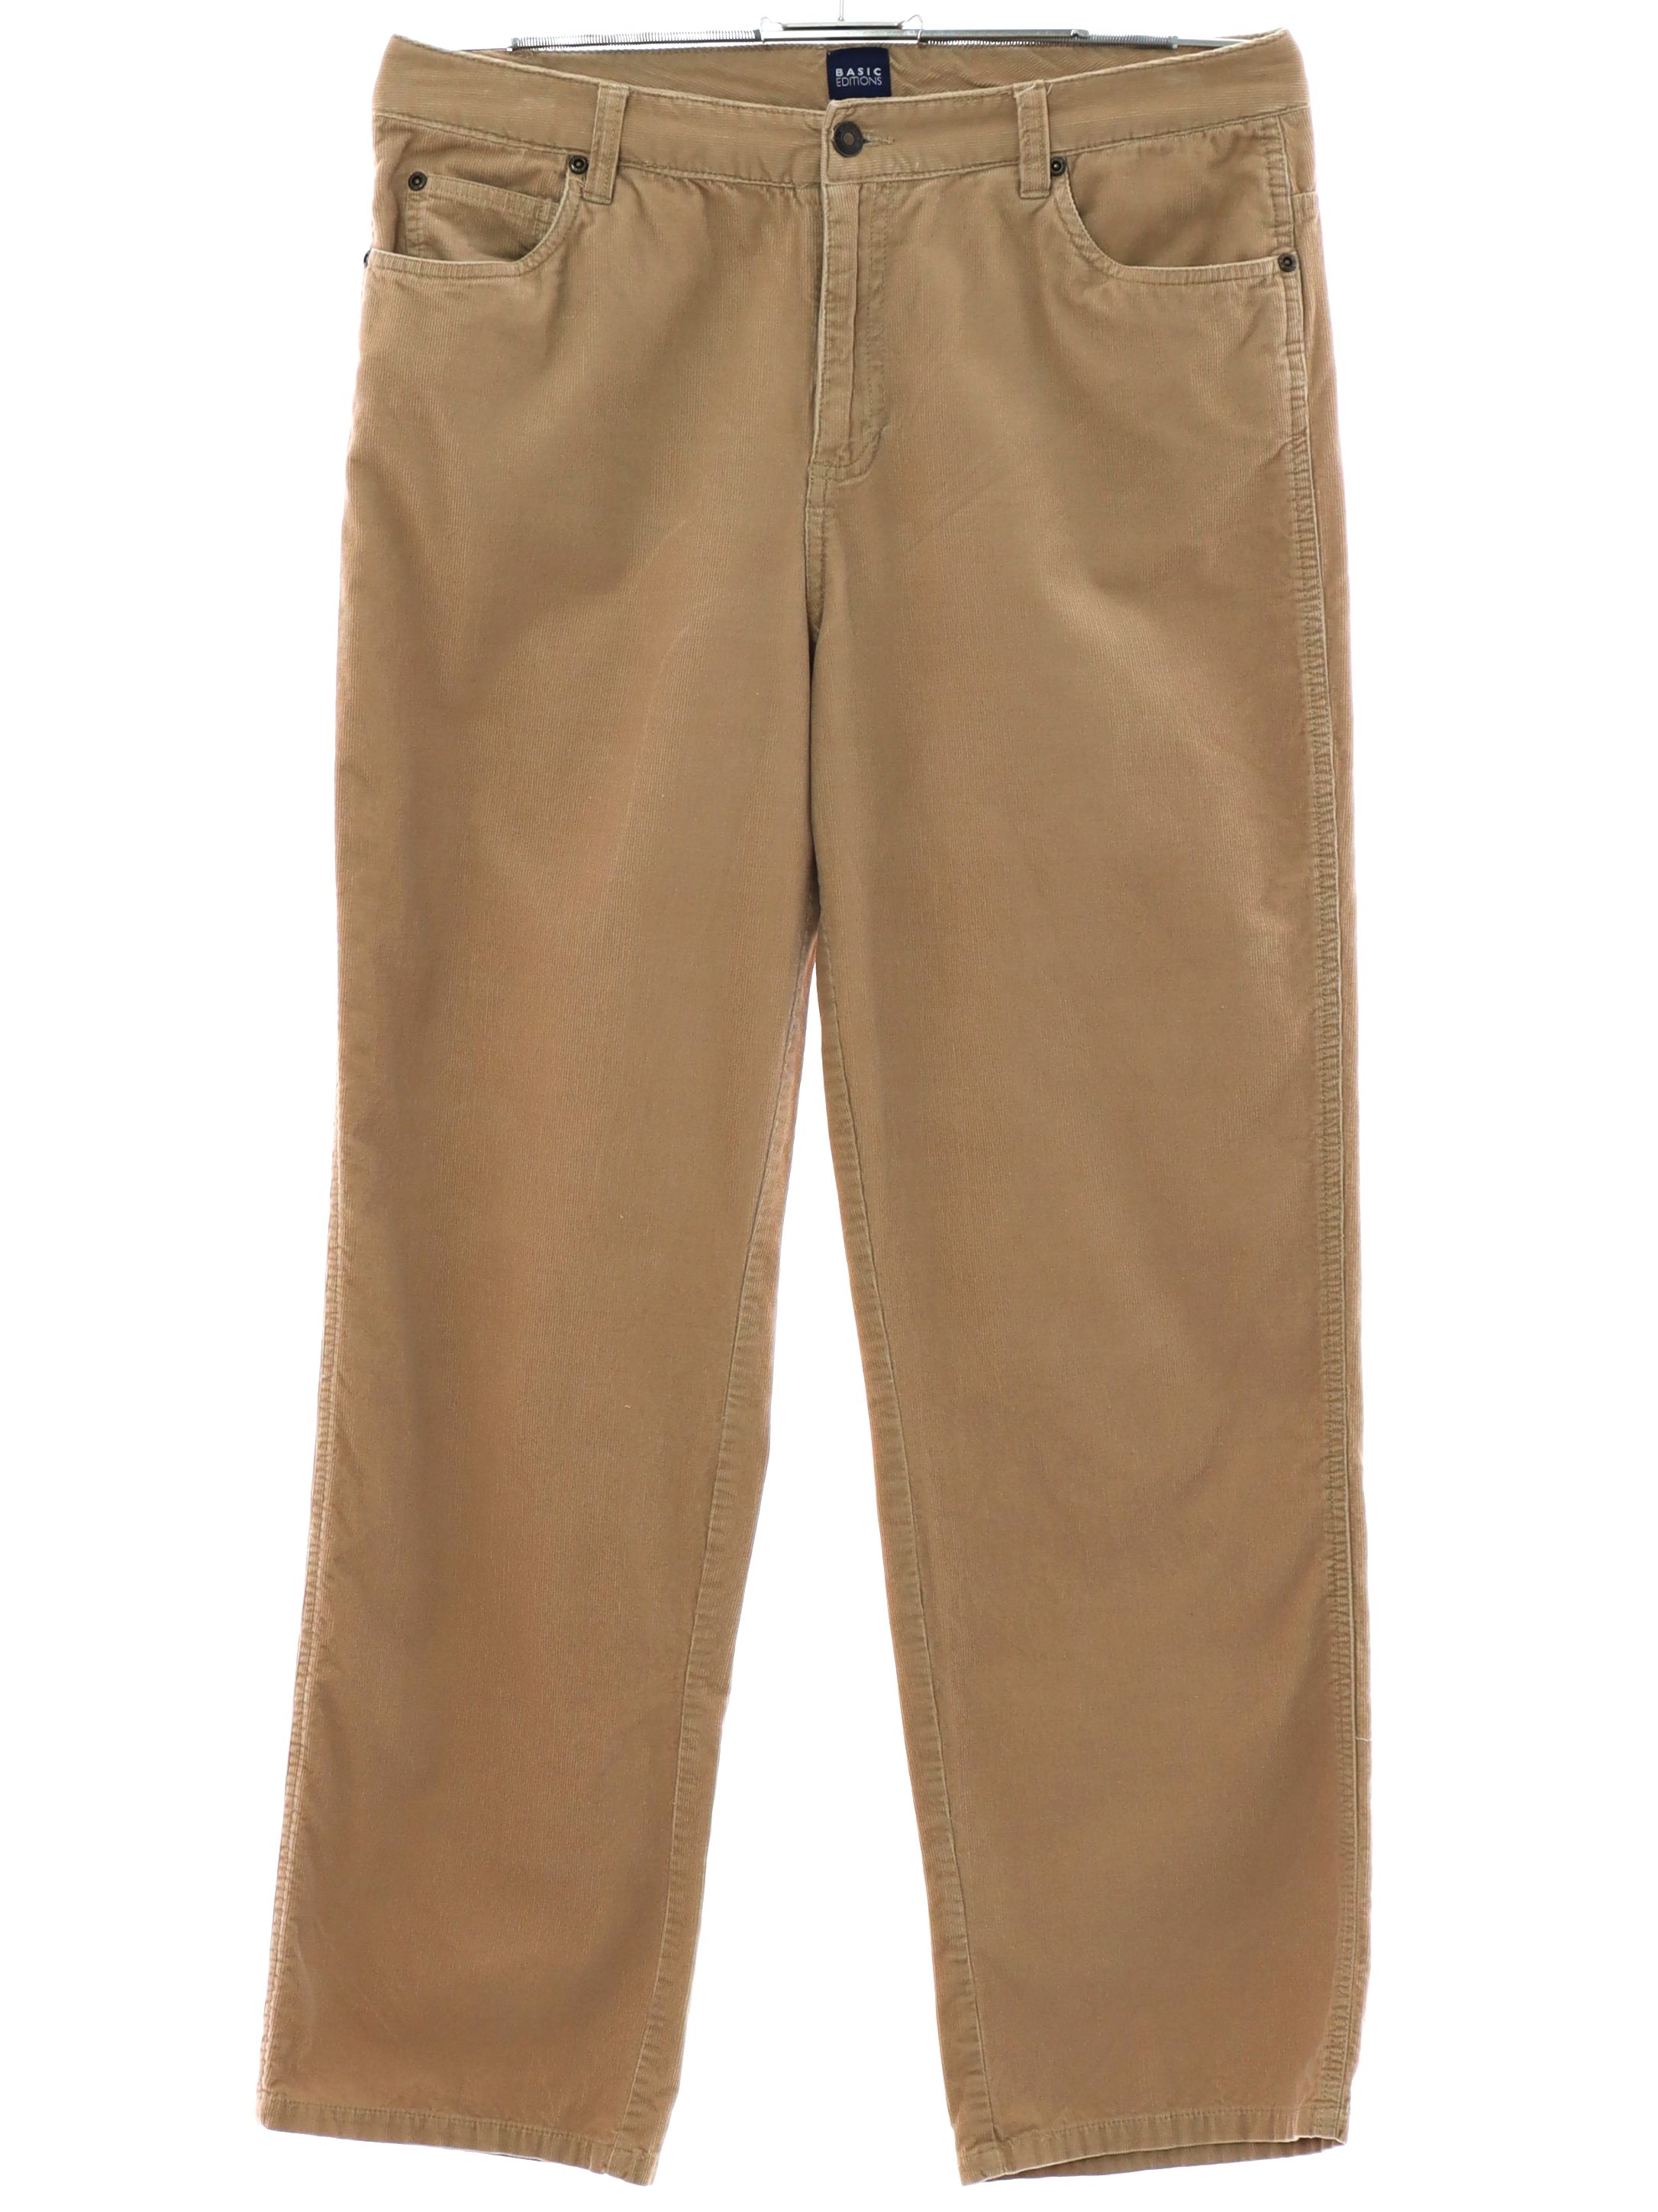 Pants: 90s (2007) -Basic Editions- Womens nude tan solid colored